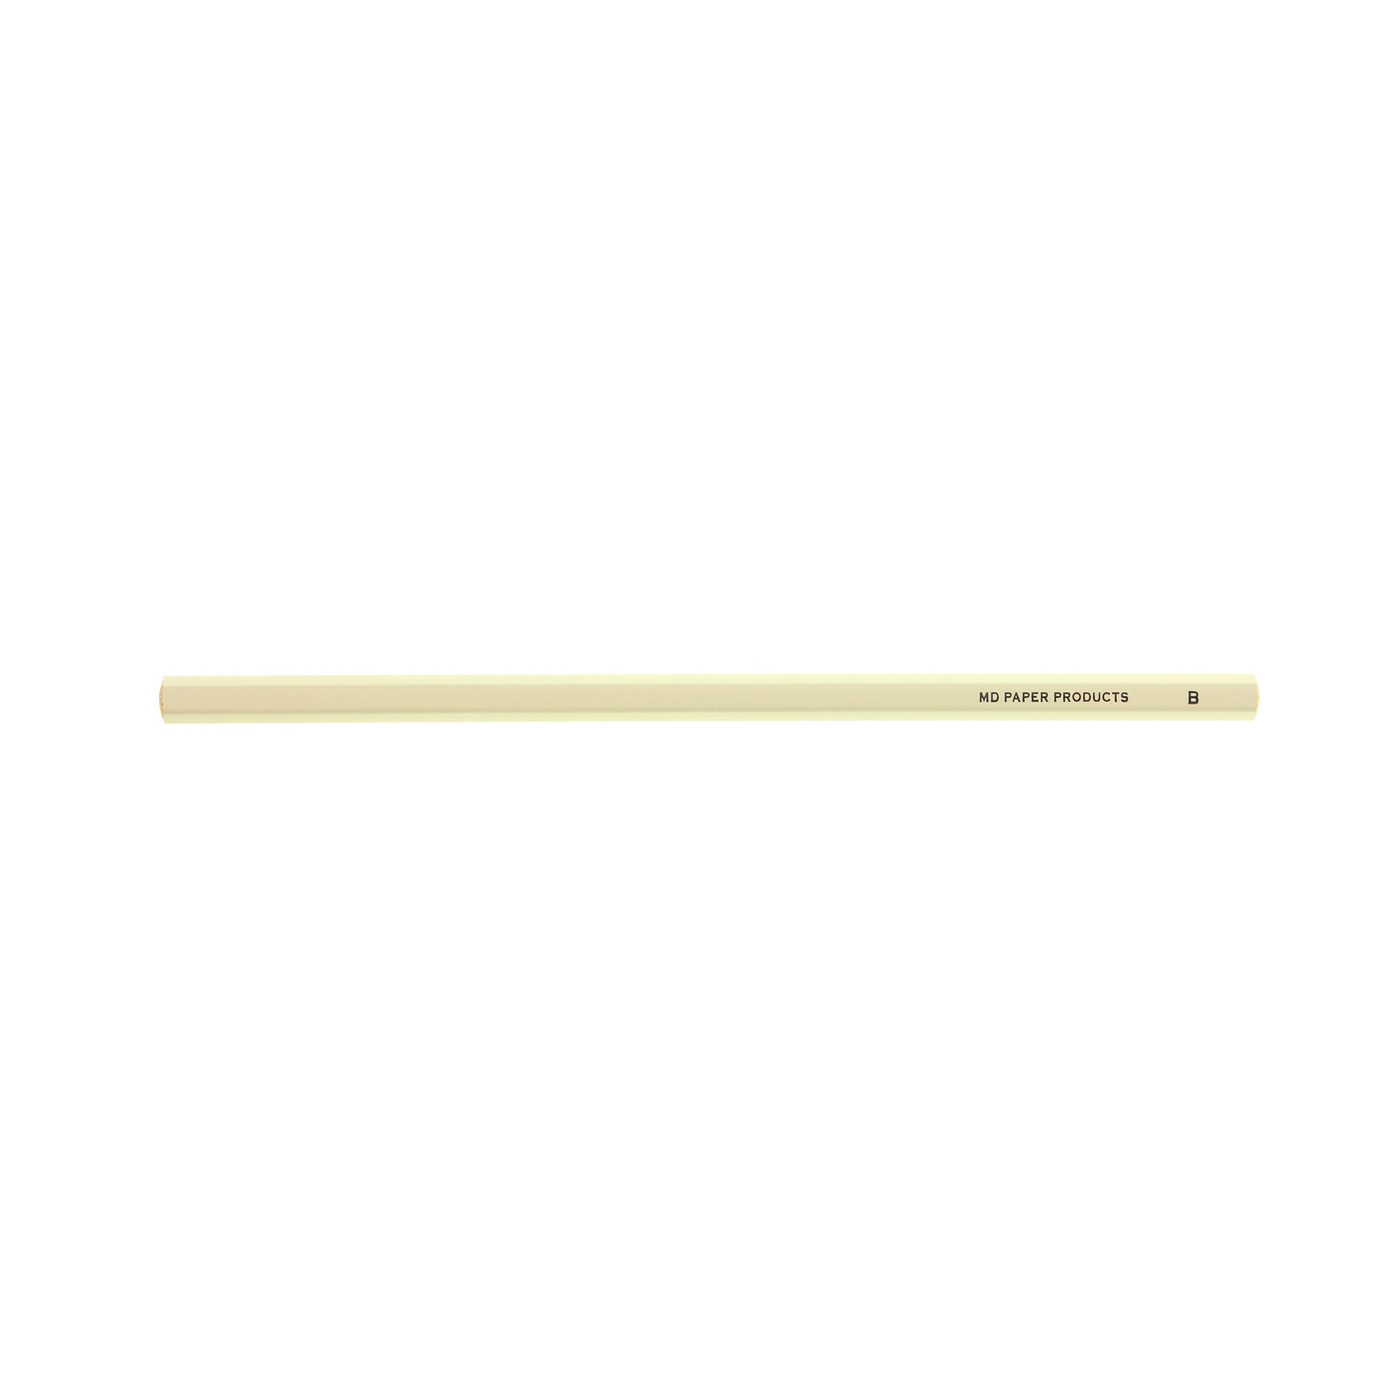 MD Paper Products - pencils B